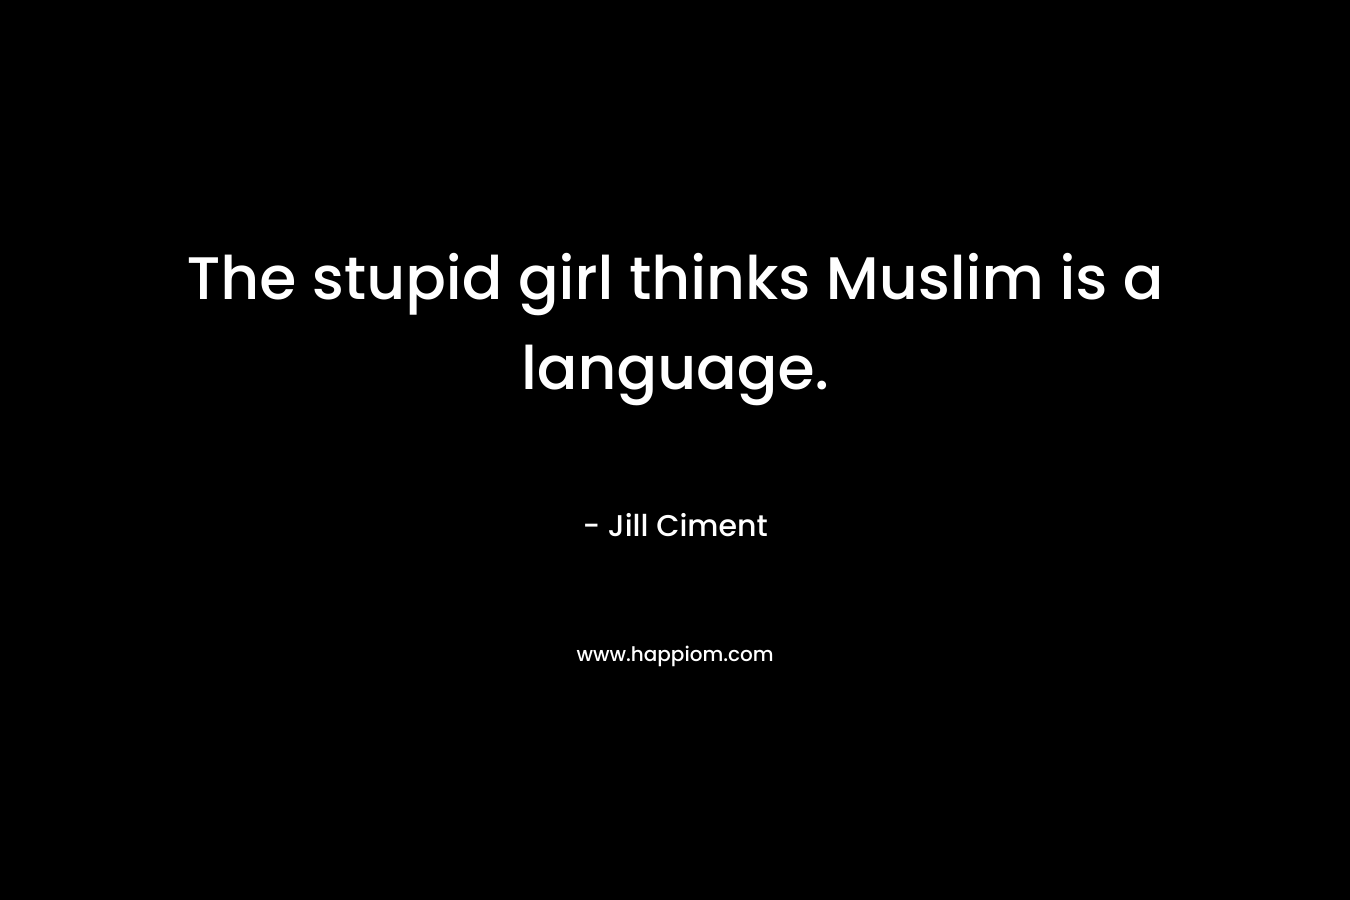 The stupid girl thinks Muslim is a language.